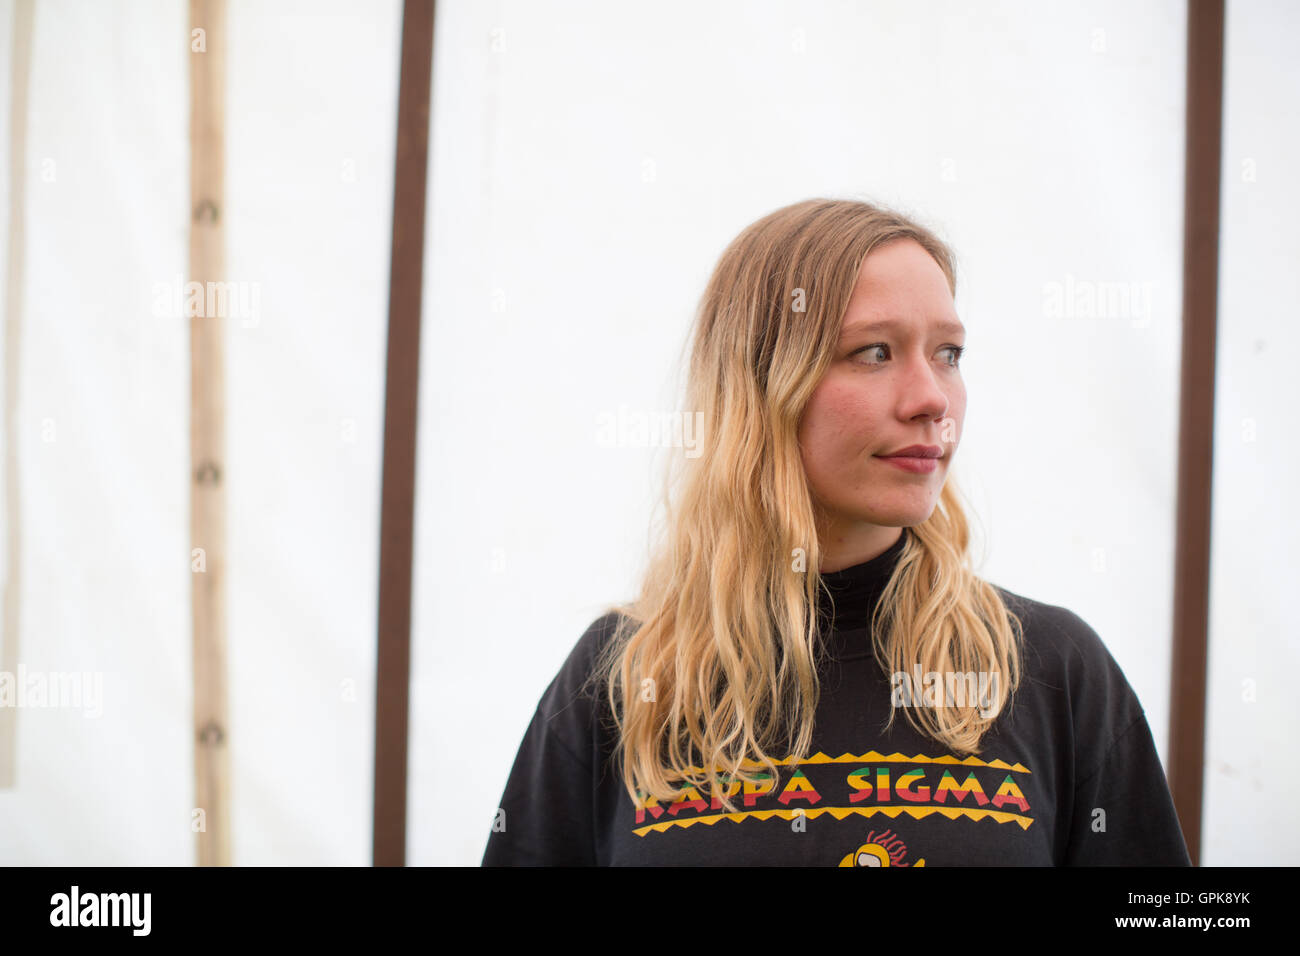 Larmer Tree Gardens, Dorset, UK. 3rd September, 2016. EXCLUSIVE: Julia Jacklin posing for photos backstage on day 3 of the 2016 End of the Road Festival in Larmer Tree Gardens in Dorset. Picture date: Saturday September 3, 2016. Photo credit: Roger Garfield/Alamy Live News Stock Photo